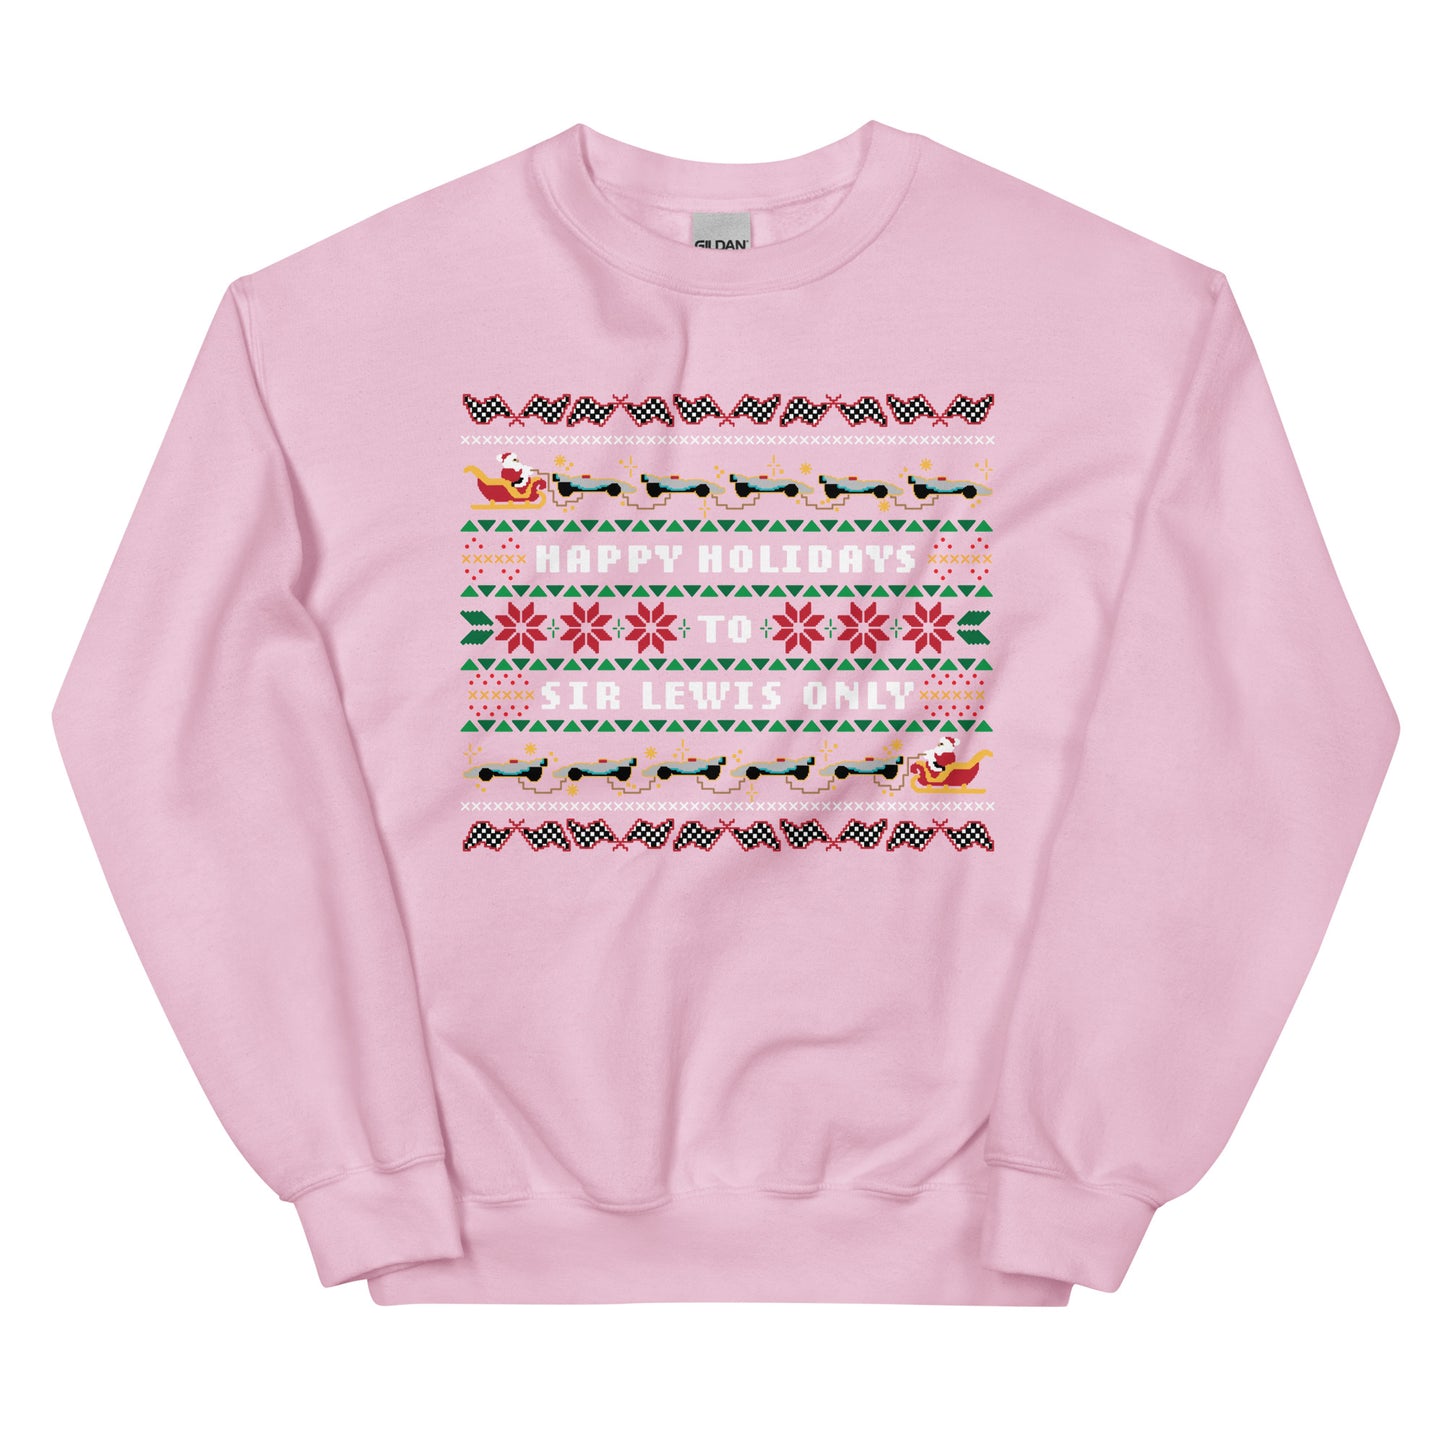 Sir Lewis Holiday Sweater